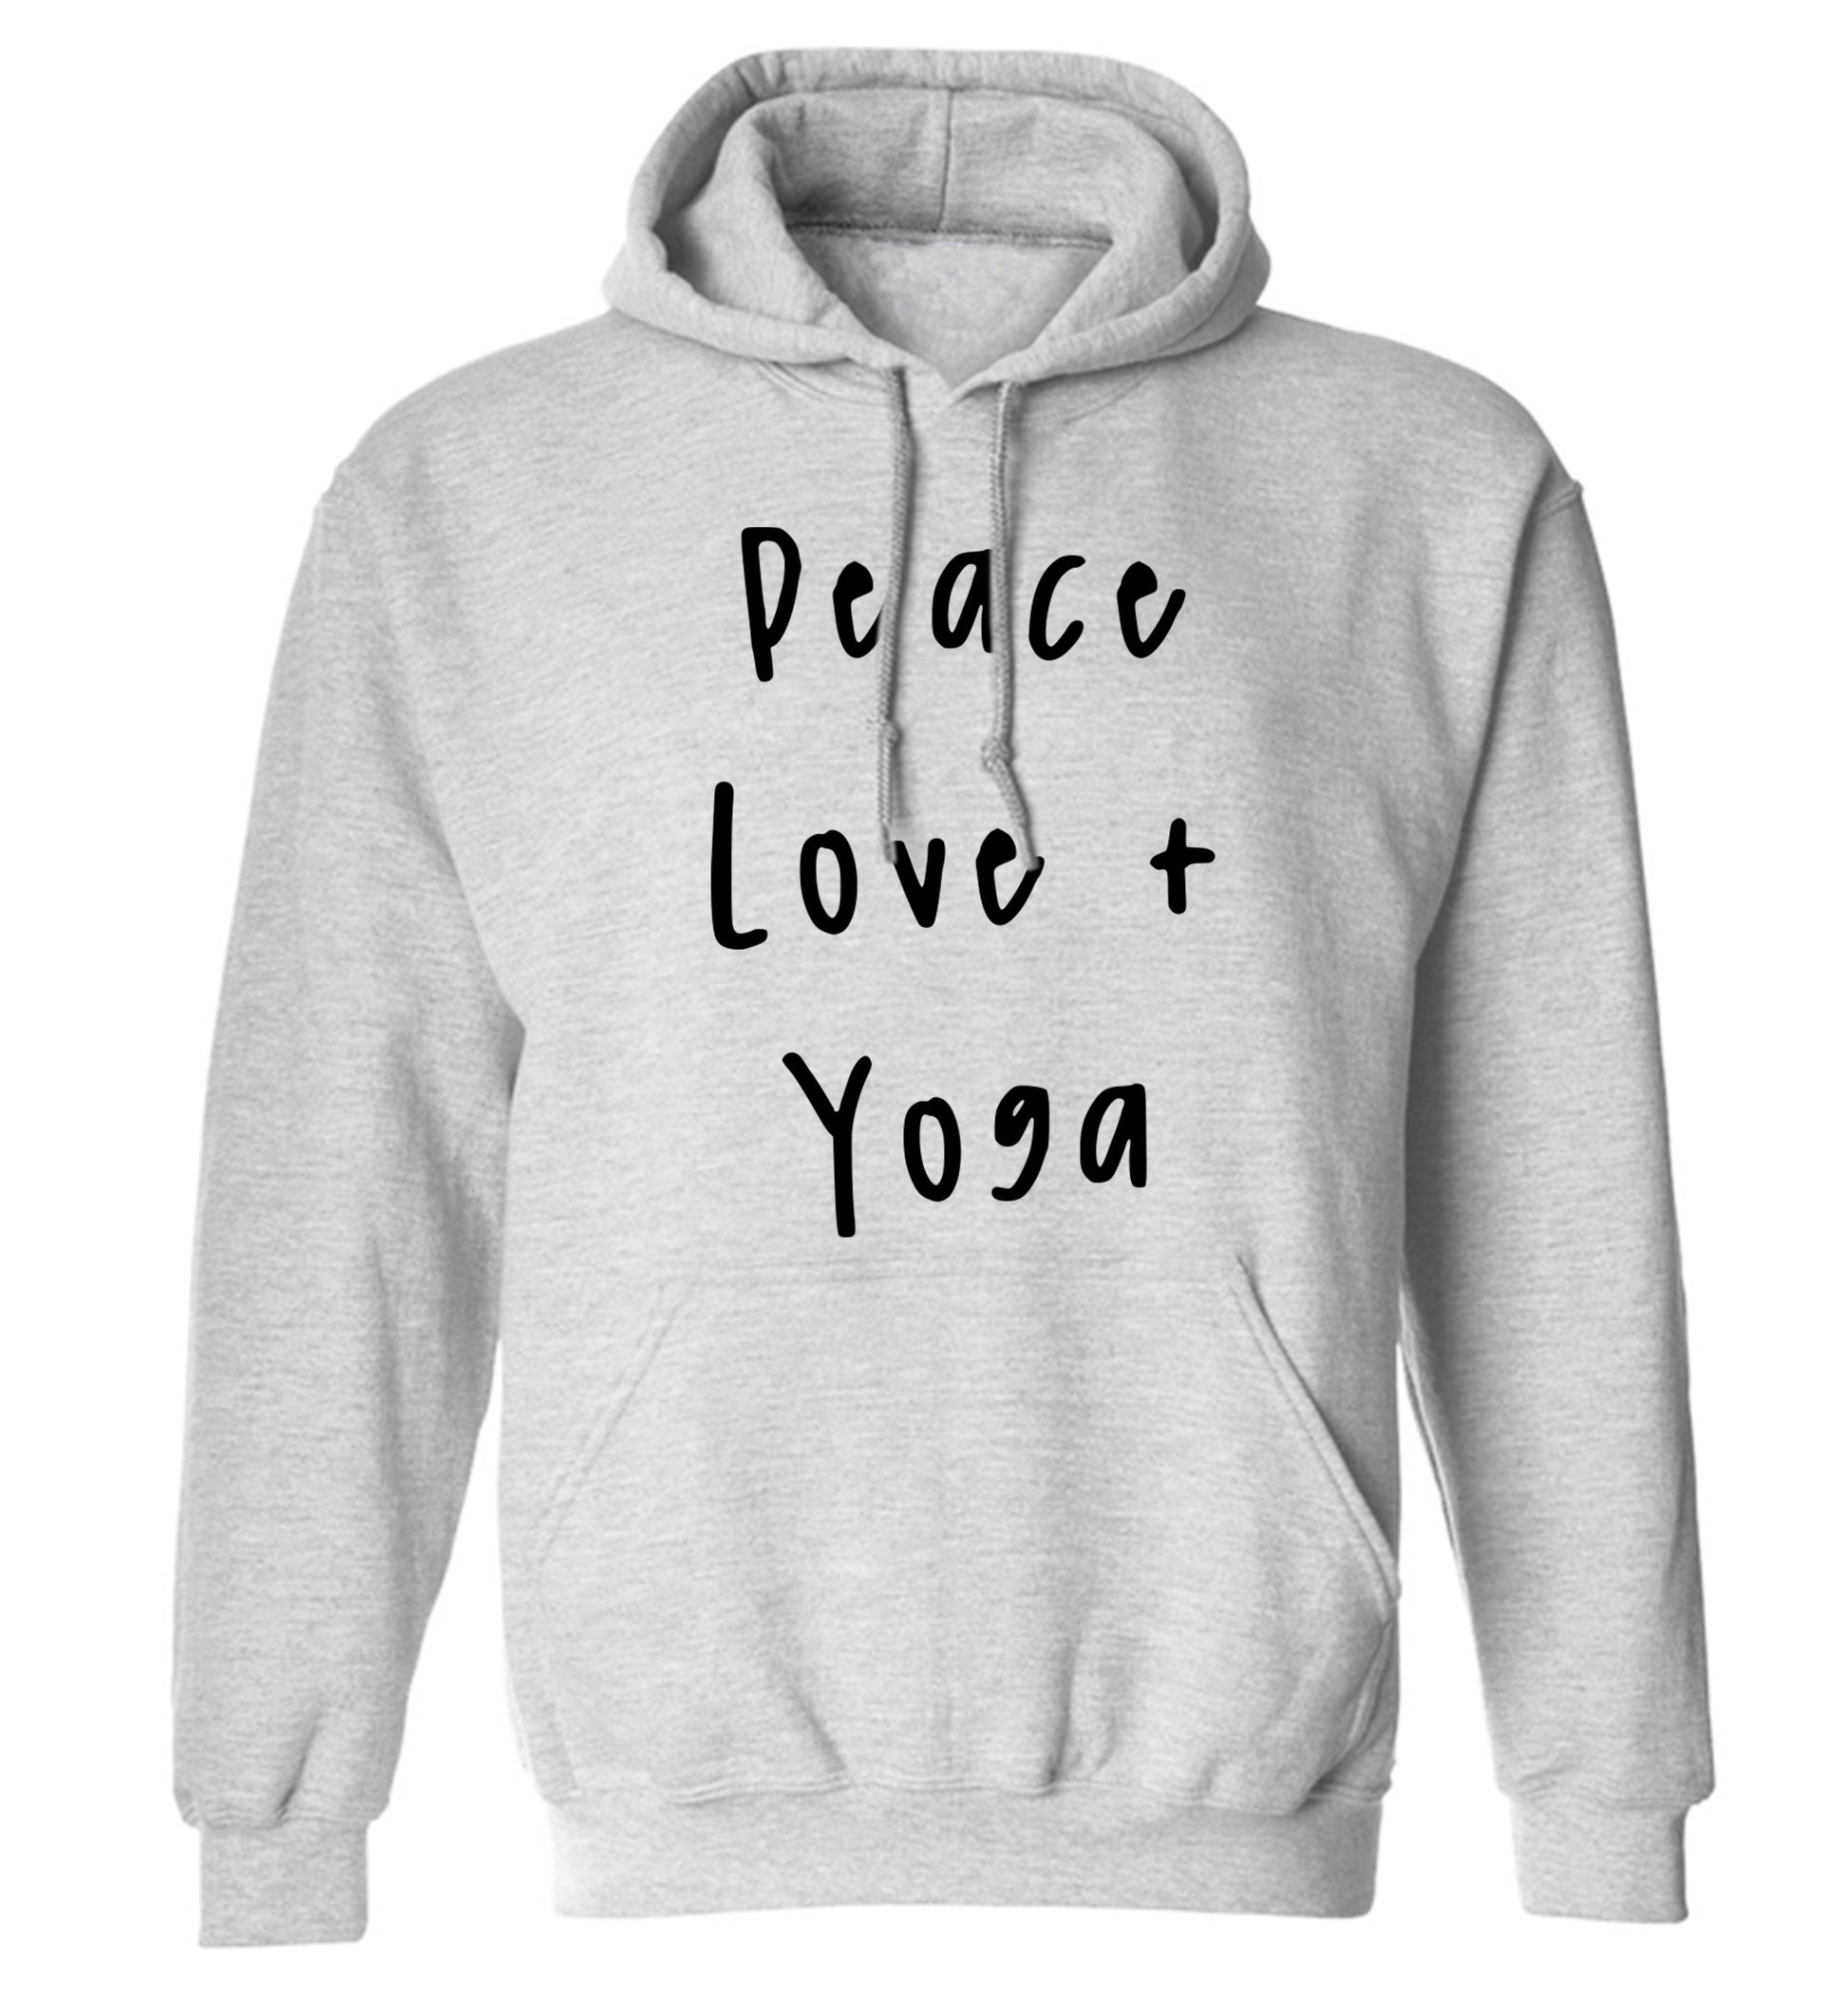 Peace love and yoga adults unisex grey hoodie 2XL